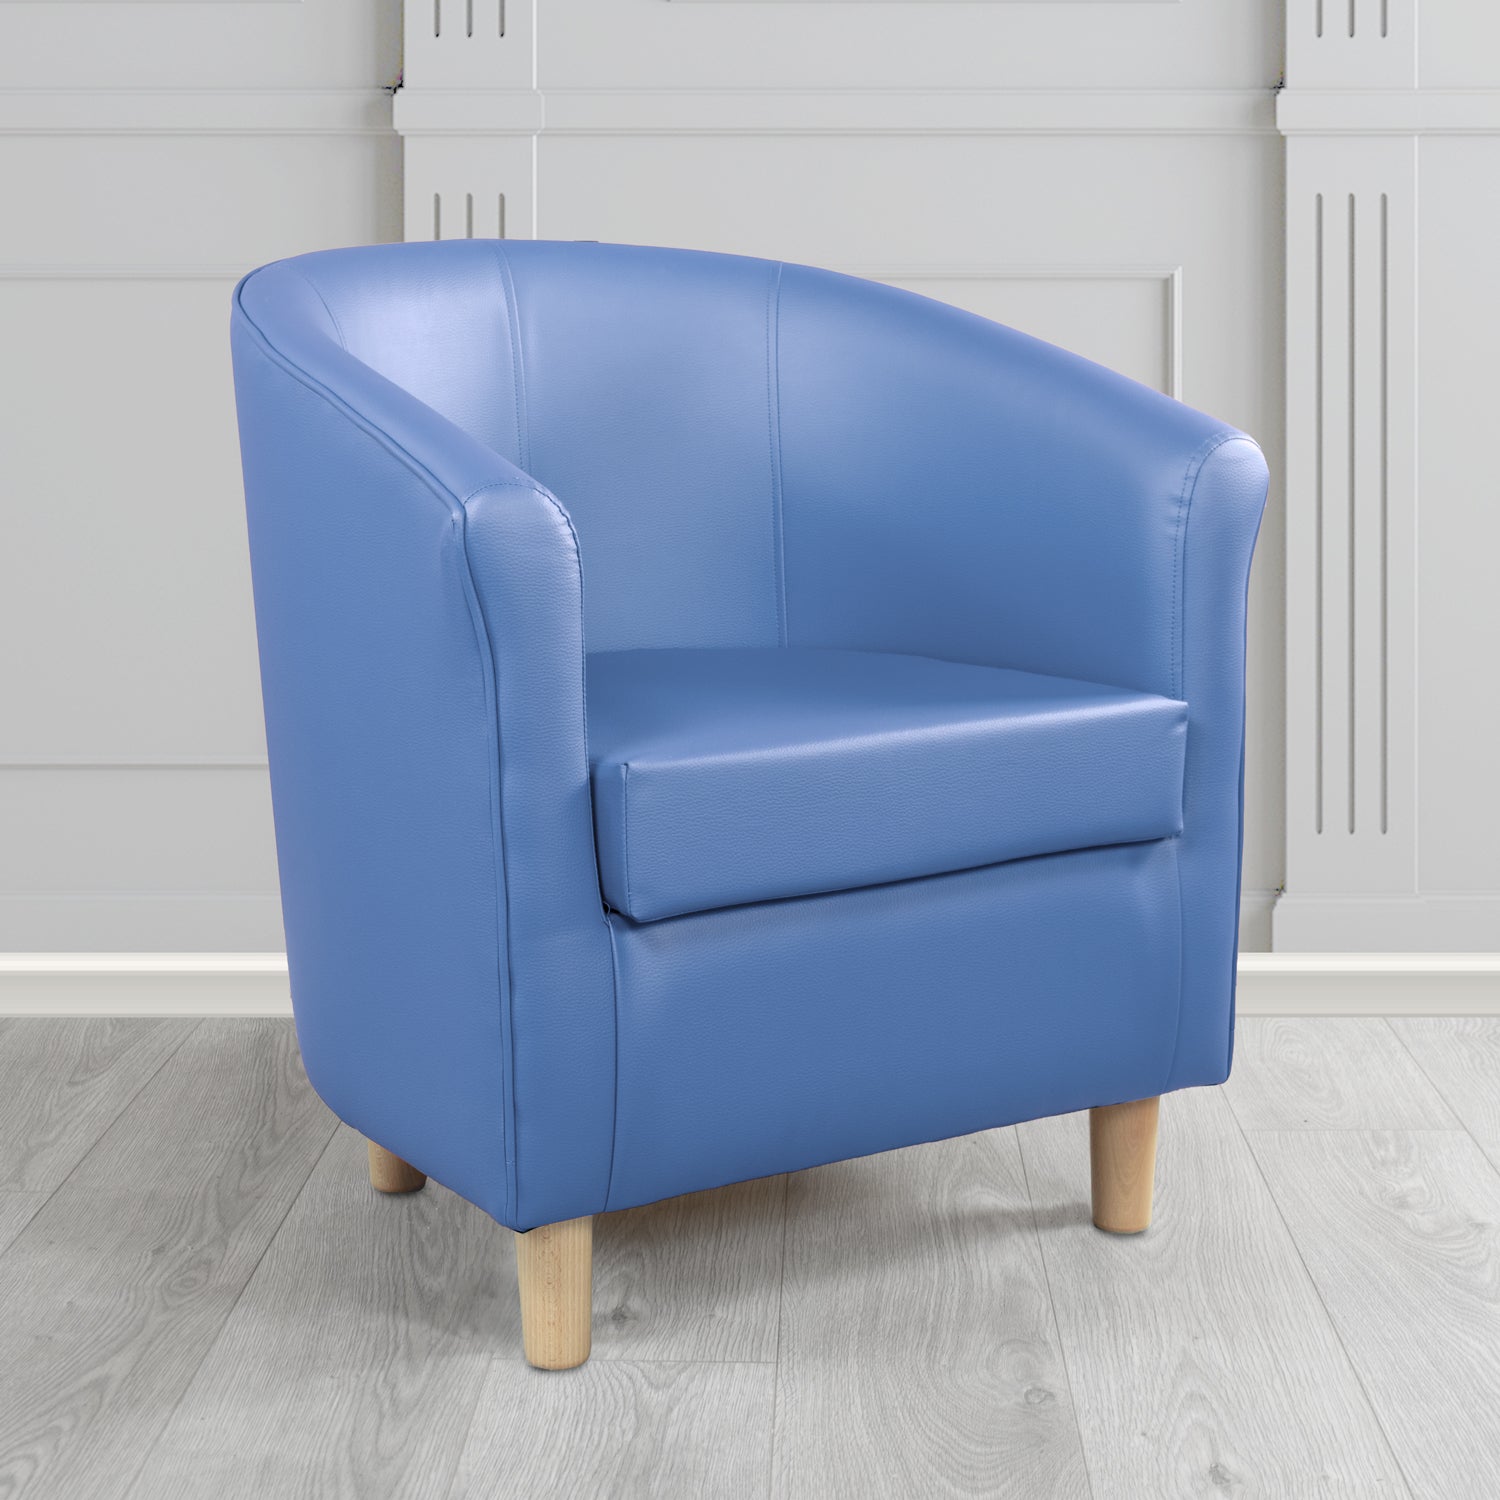 Tuscany Just Colour Blue Steel Antimicrobial Crib 5 Contract Faux Leather Tub Chair - The Tub Chair Shop